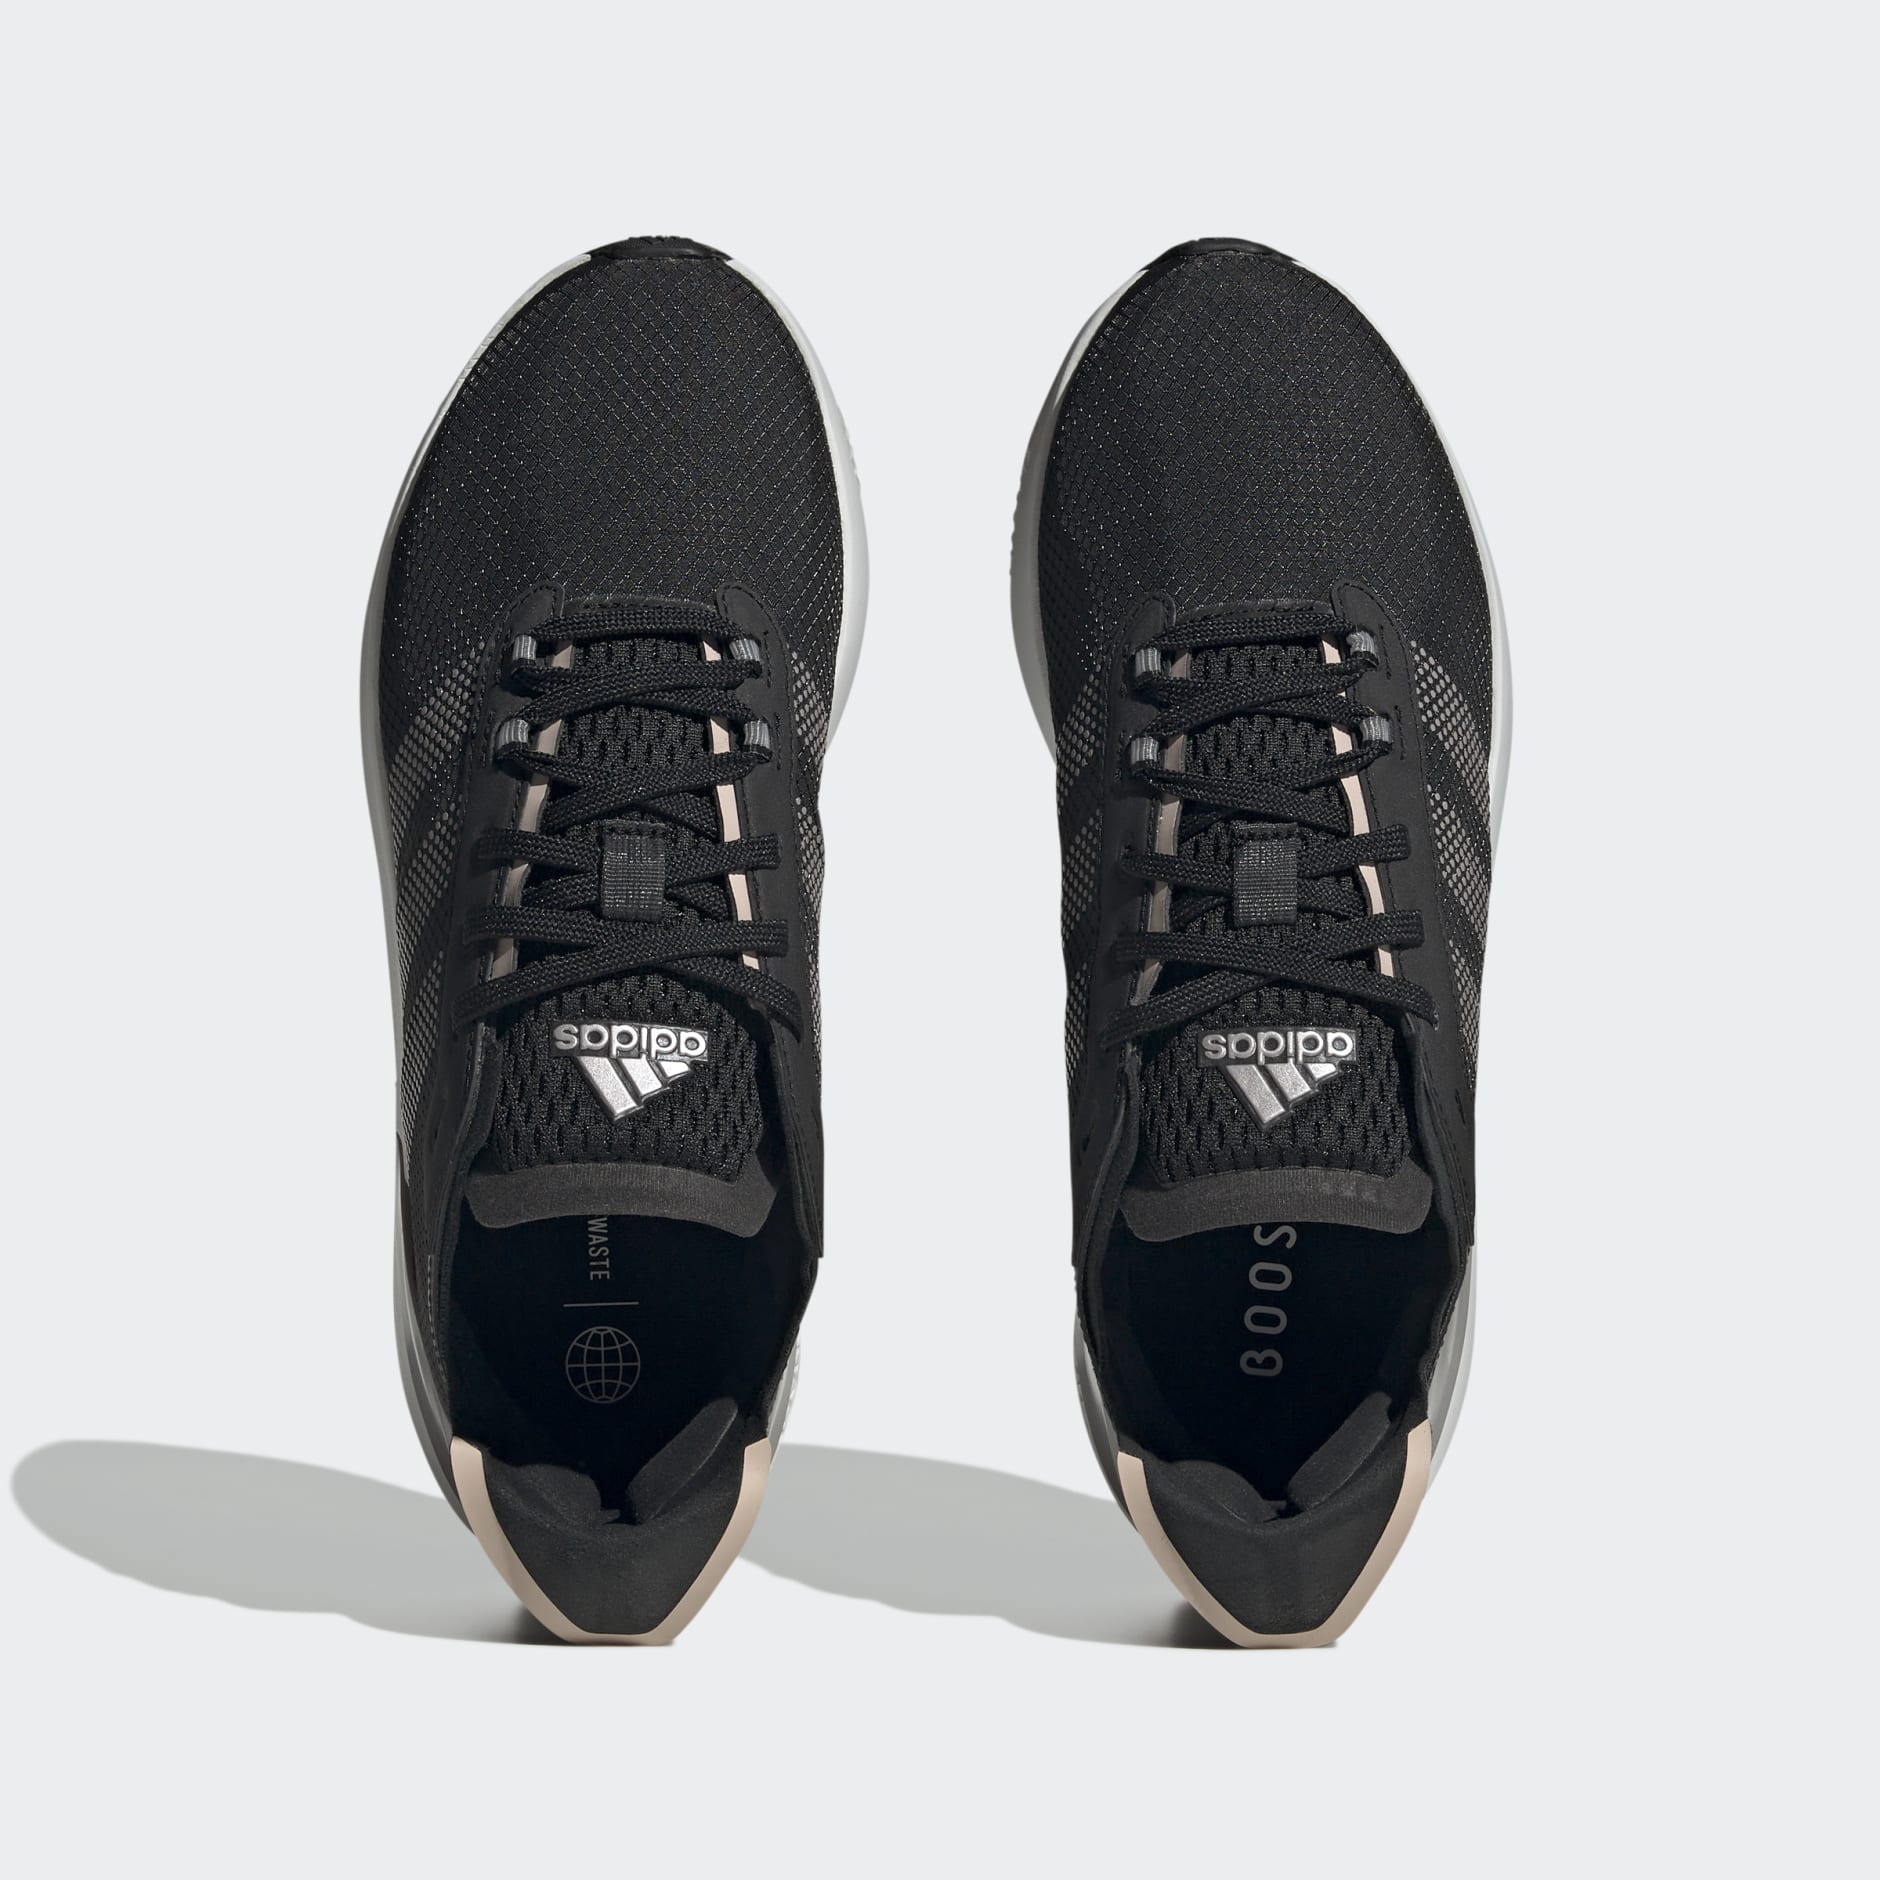 Shoes - Avryn Shoes - Black | adidas South Africa